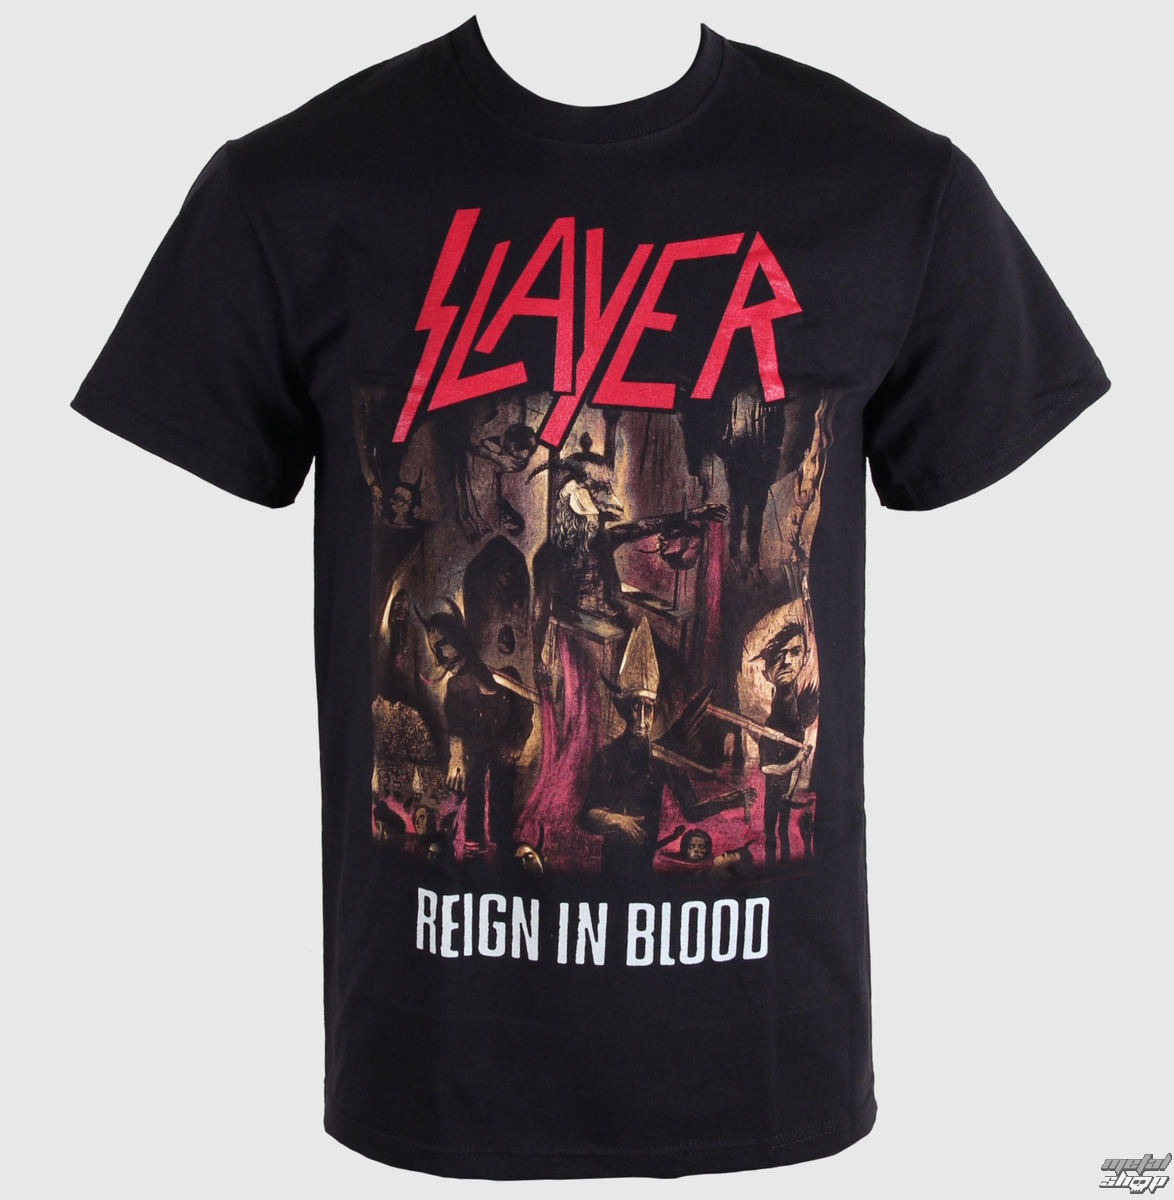 Slayer - Reign In Blood (Small)